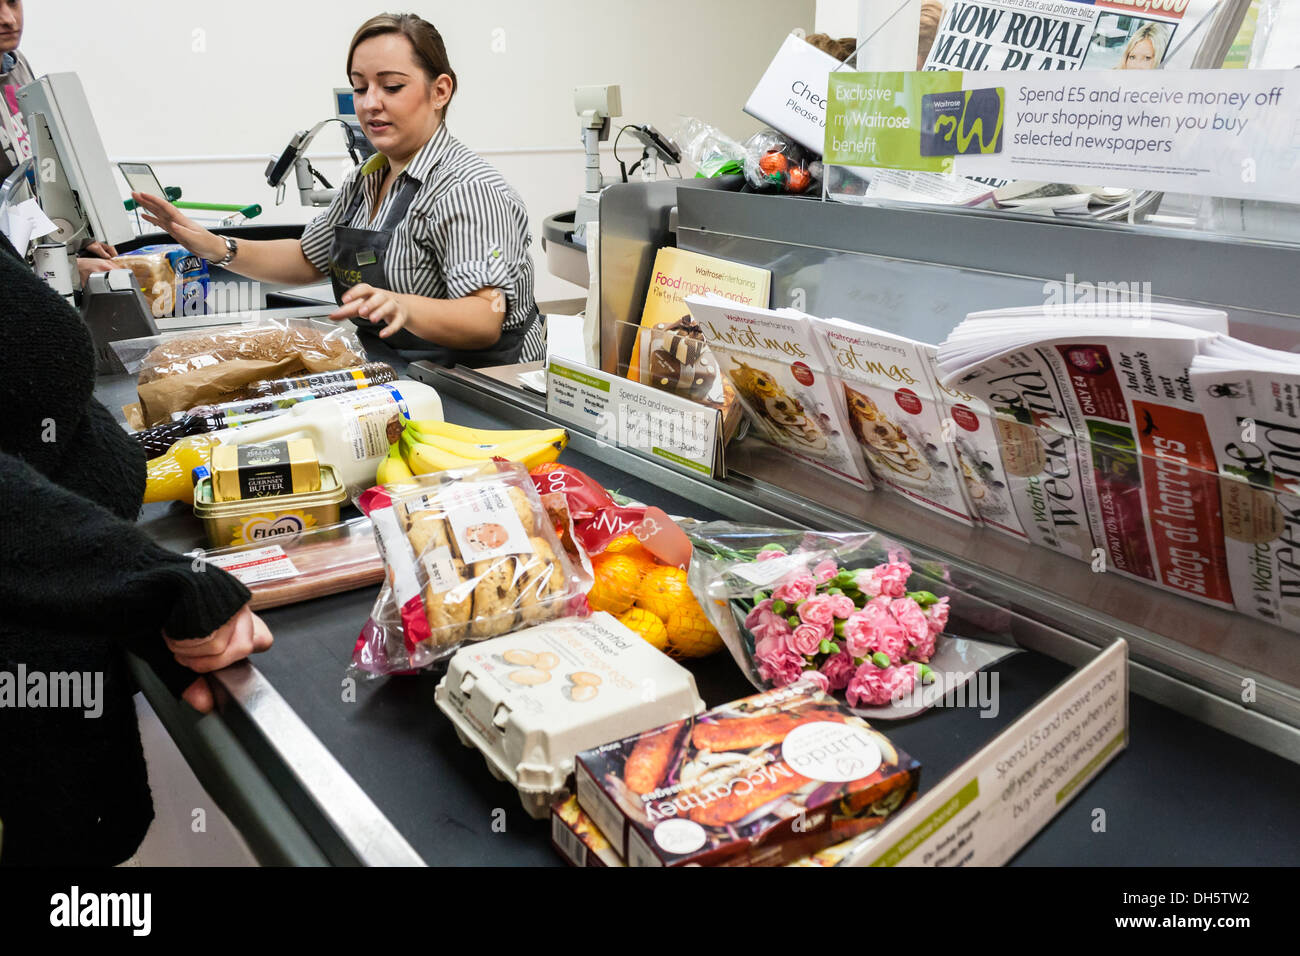 Waitrose supermarket checkout till as food products move along the belt. GB, UK Stock Photo